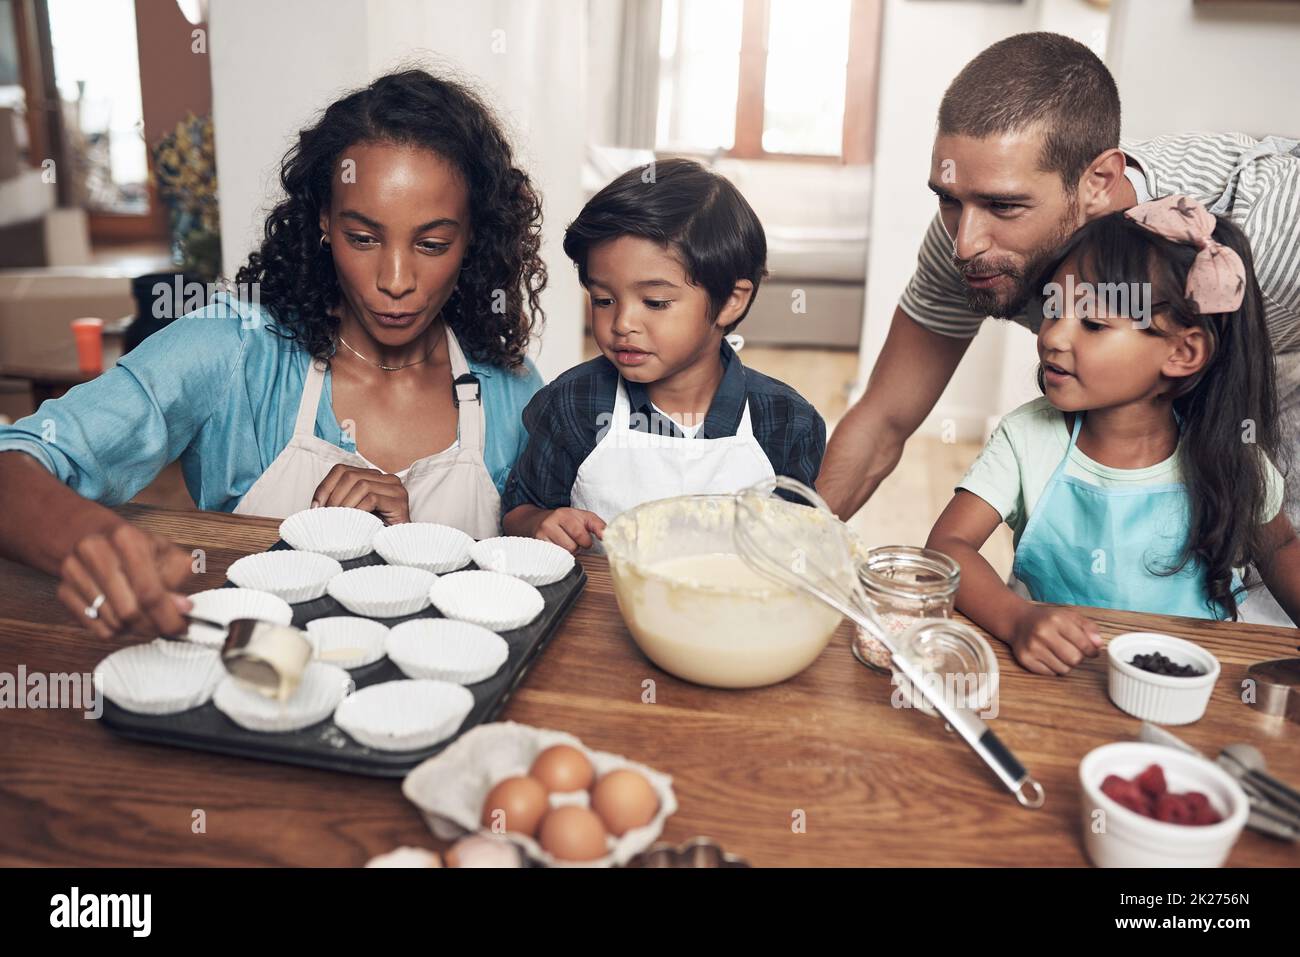 Go home and love your family. Shot of a young couple baking at home with their two children. Stock Photo